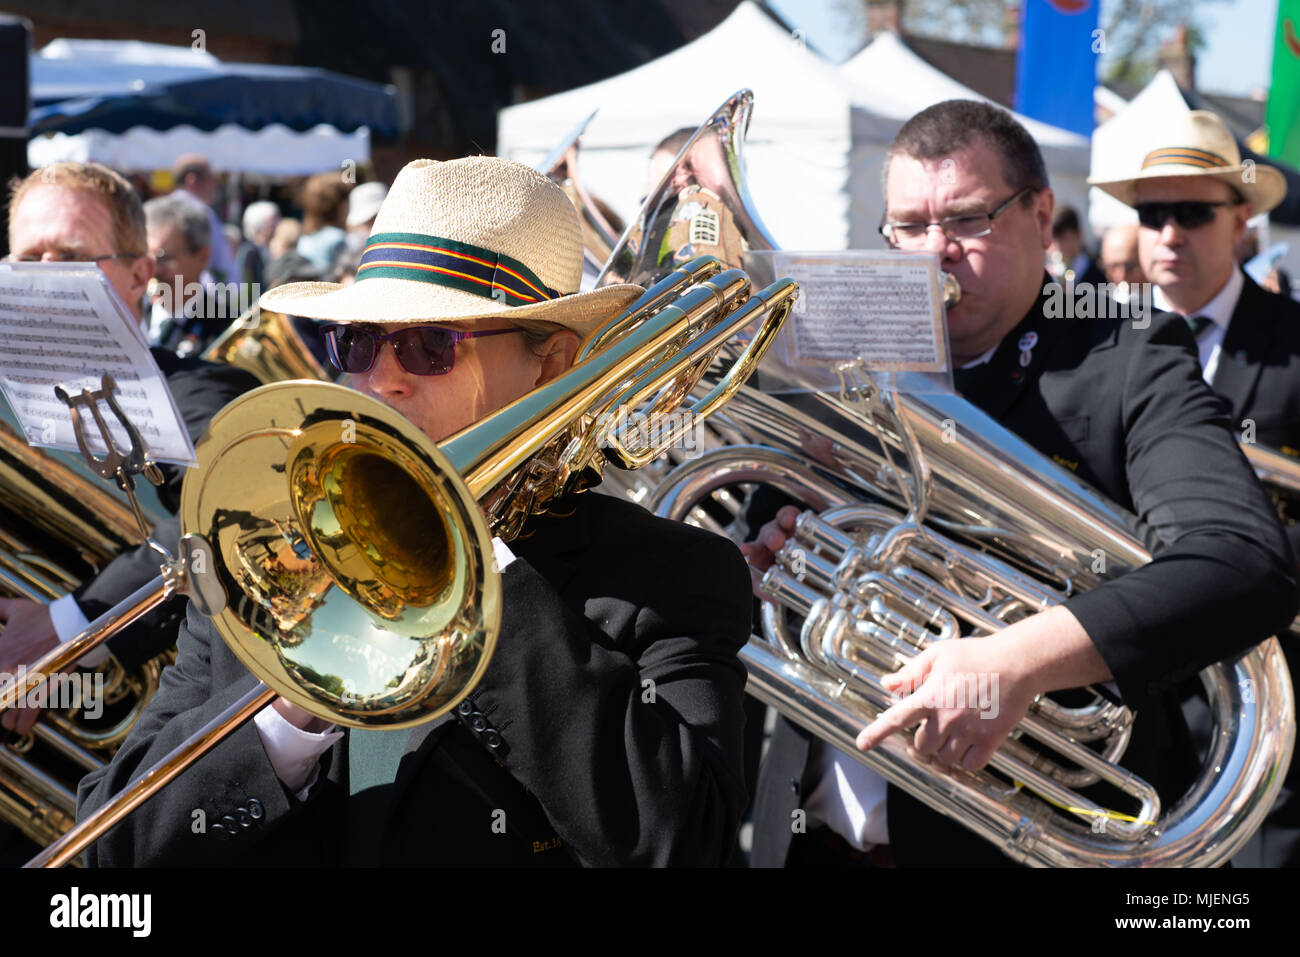 The Borough, Downton, Salisbury, Wiltshire, UK, 5th May 2018. Mayday bank holiday weekend street fair celebrates the arrival of spring for the 39th successive year. In glorious sunny weather, a brass band march in the parade. Credit: Paul Biggins/Alamy Live News Stock Photo